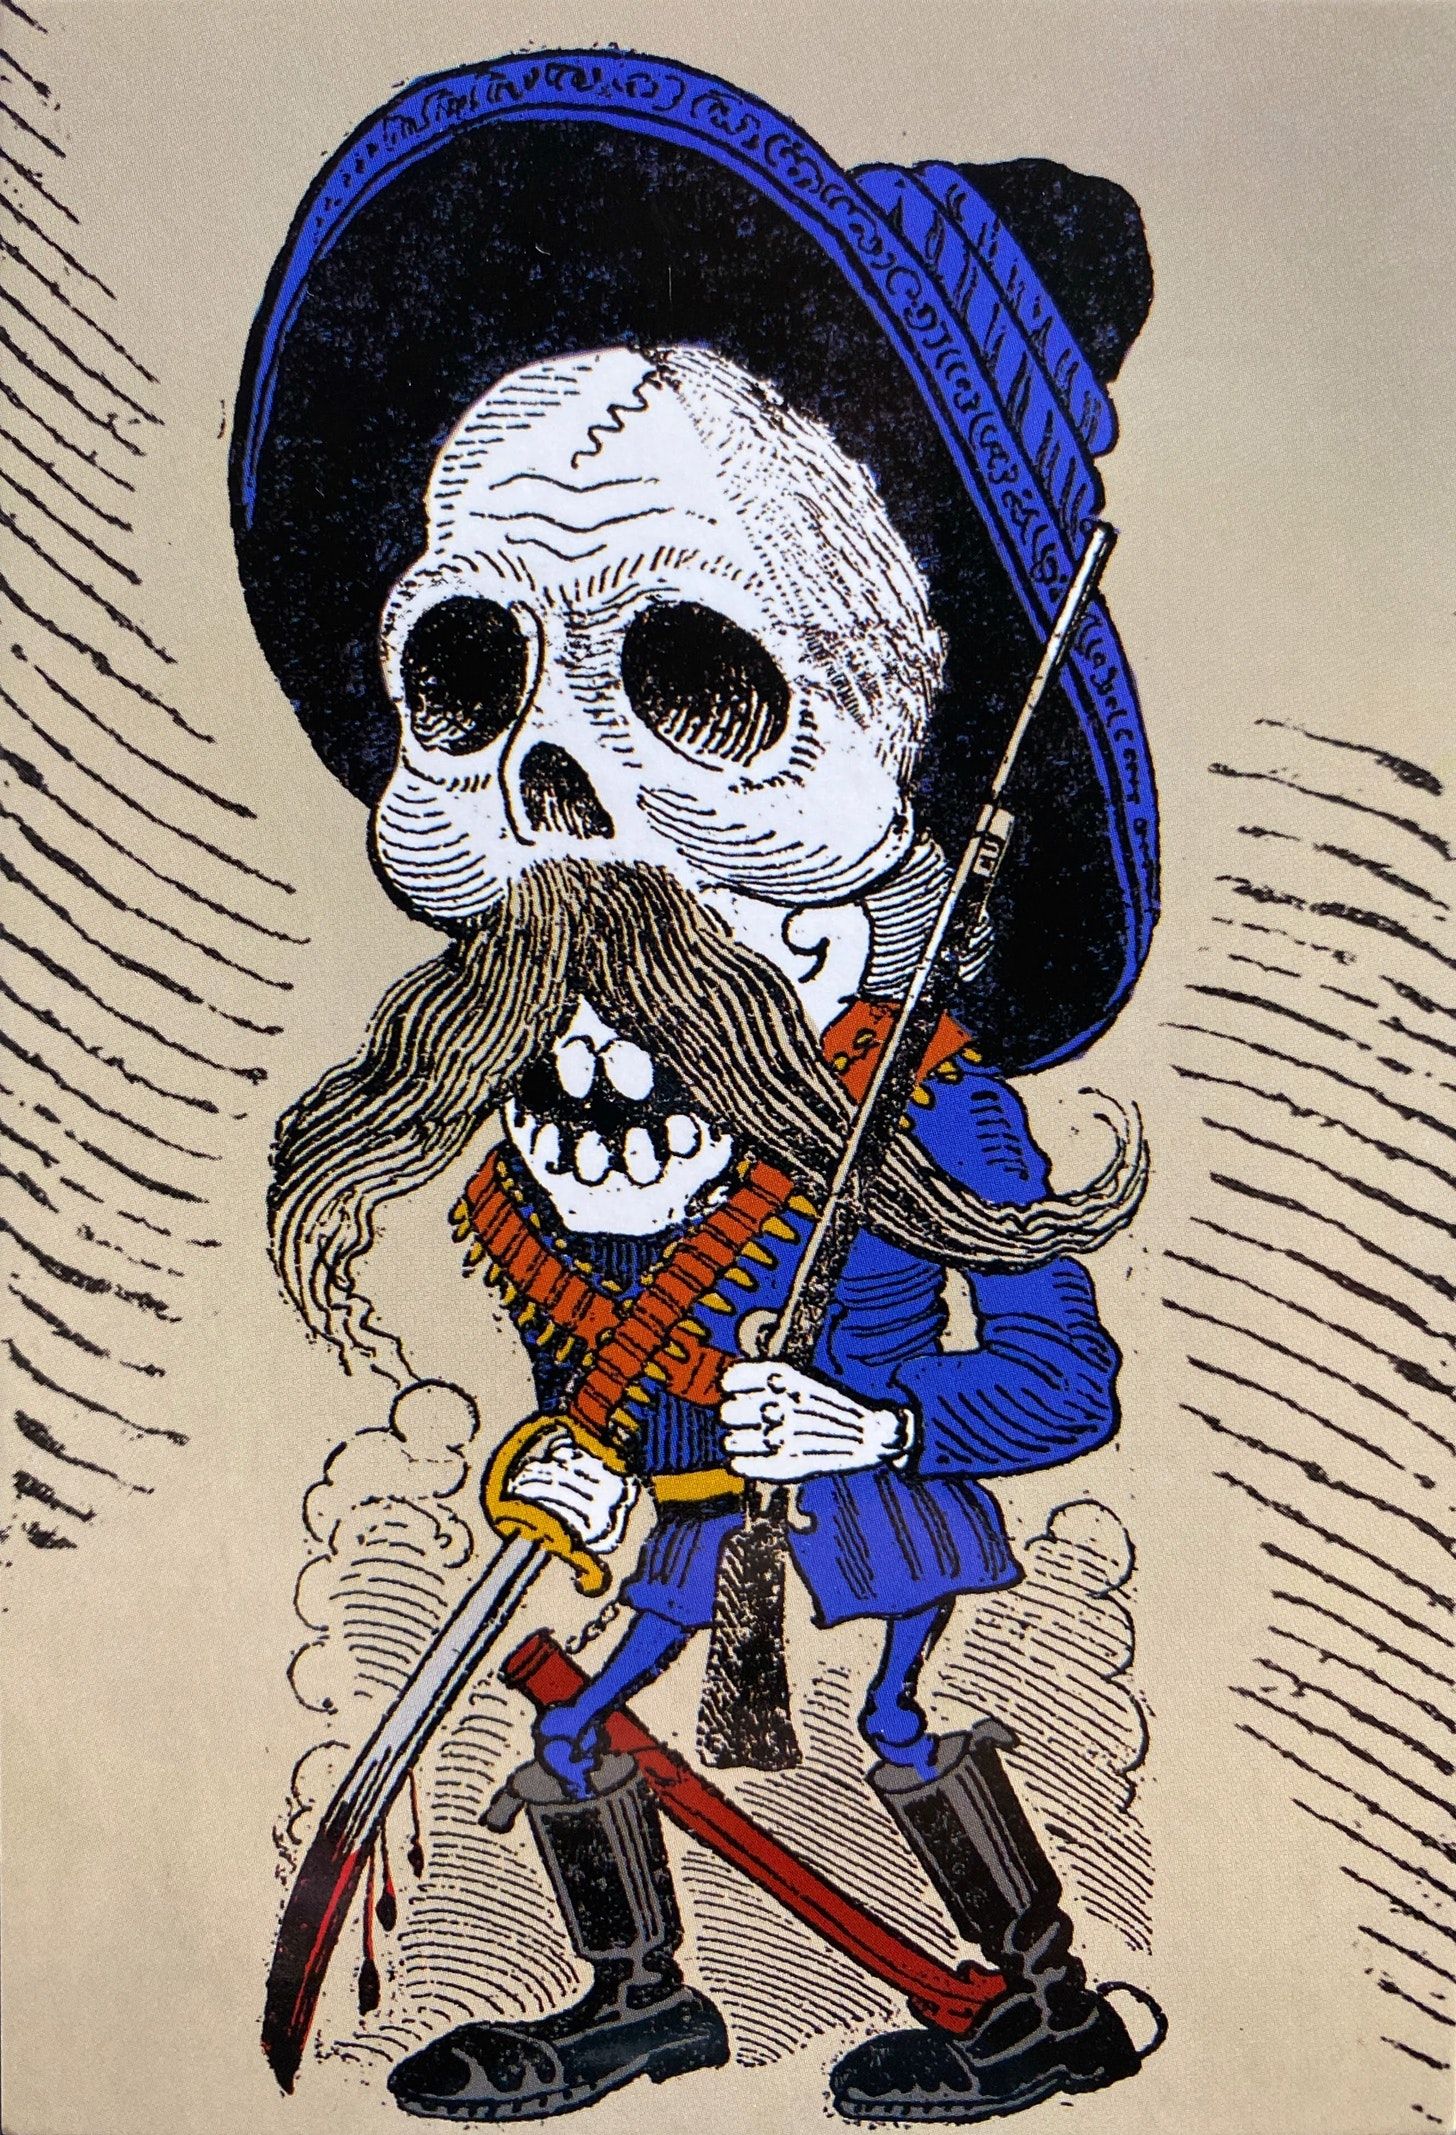 A depiction of Emiliano Zapata, Mexican caudillo, as a skeleton. It has the iconic hat of the revolutionary era, while carrying a sword with blood in his right hand and a musket in his left one.